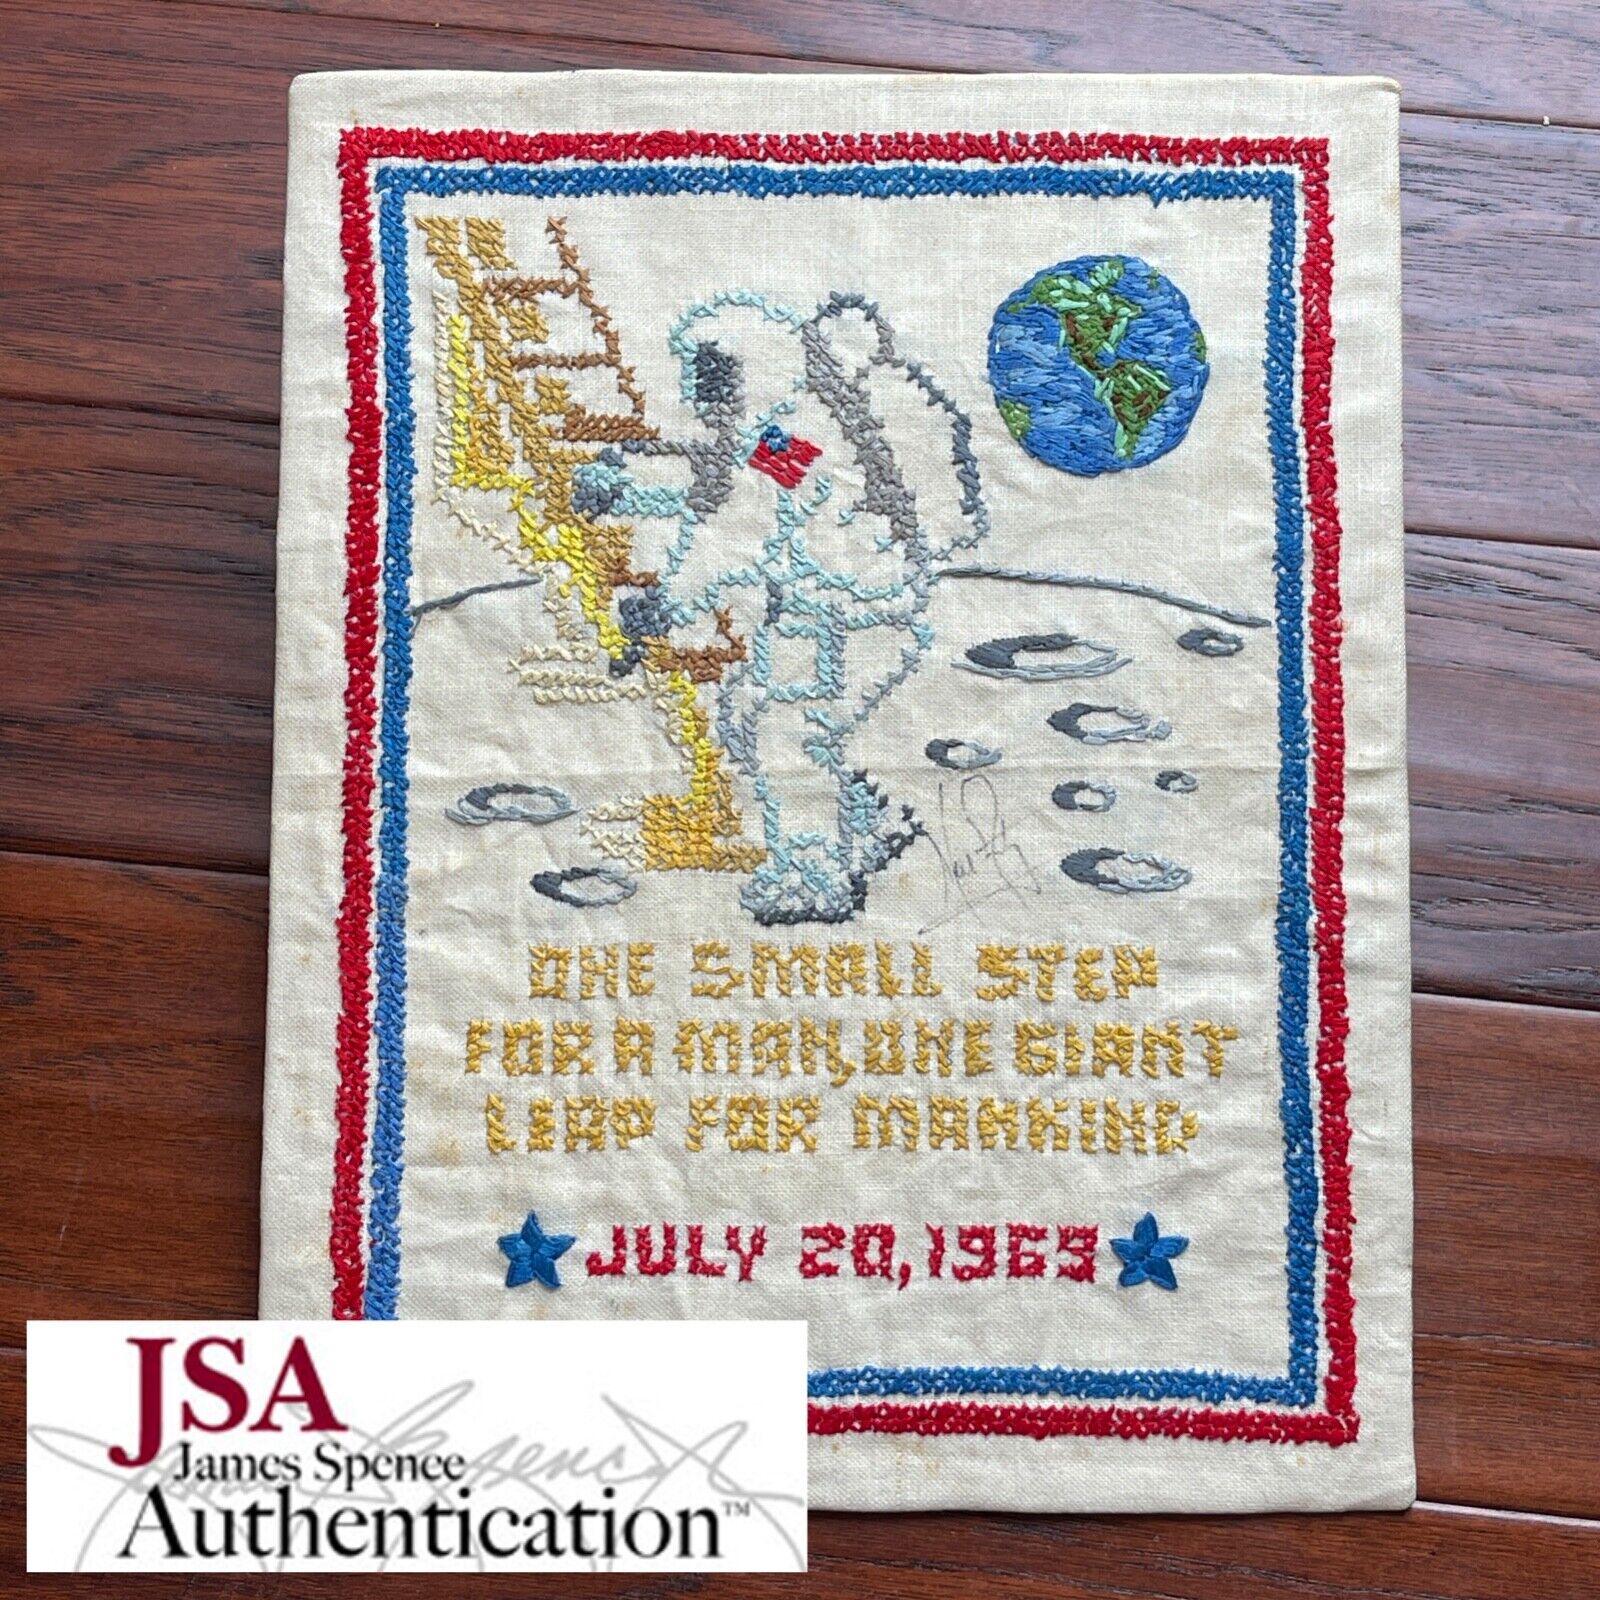 NEIL ARMSTRONG * JSA * Autograph “ONE SMALL STEP” Embroidery Signed * APOLLO 11